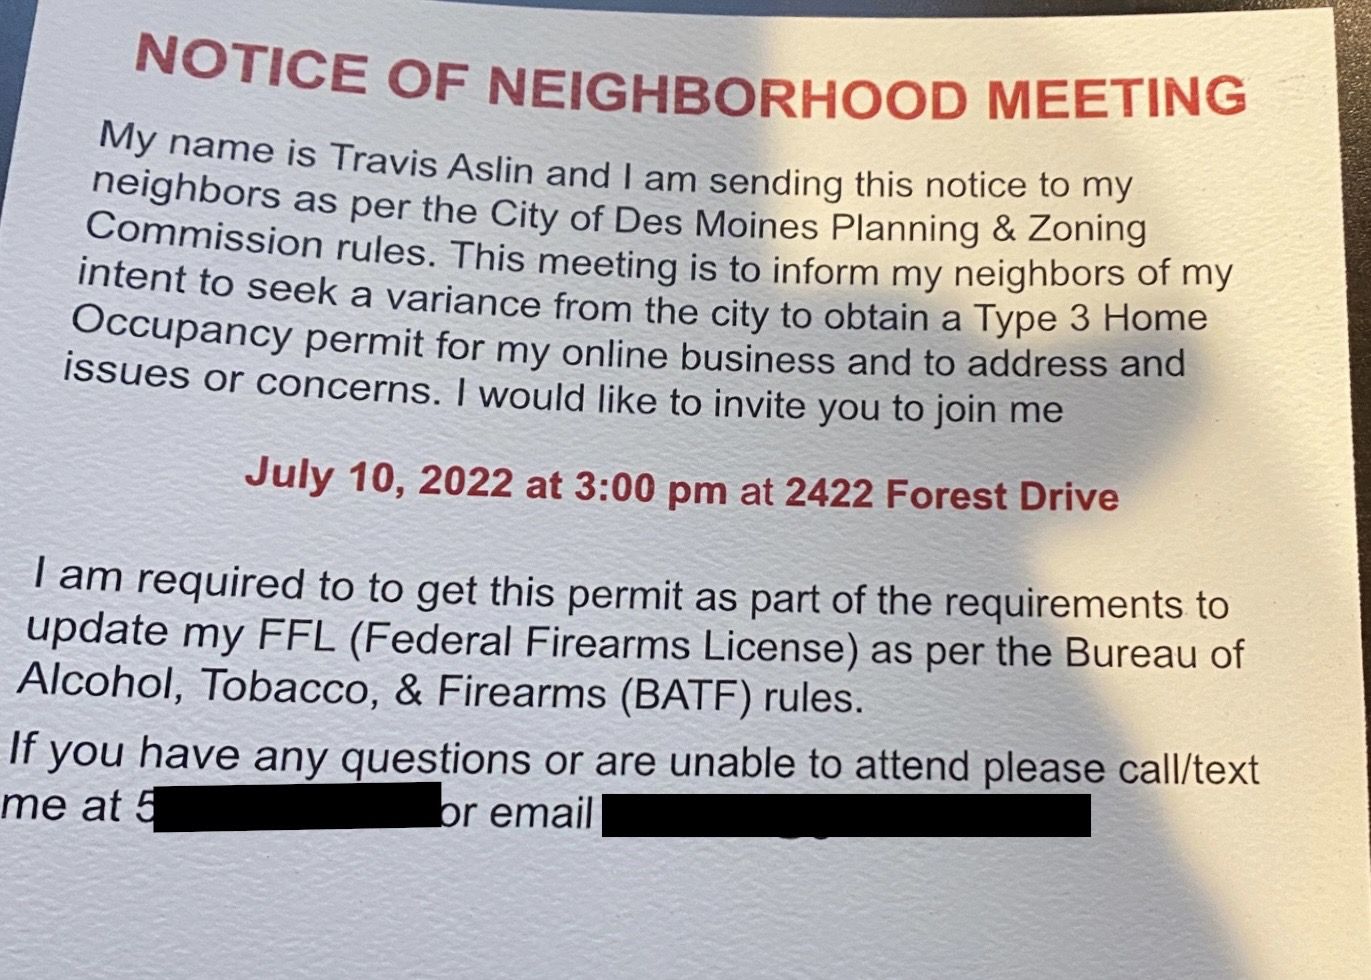 A photo of a meeting notice.